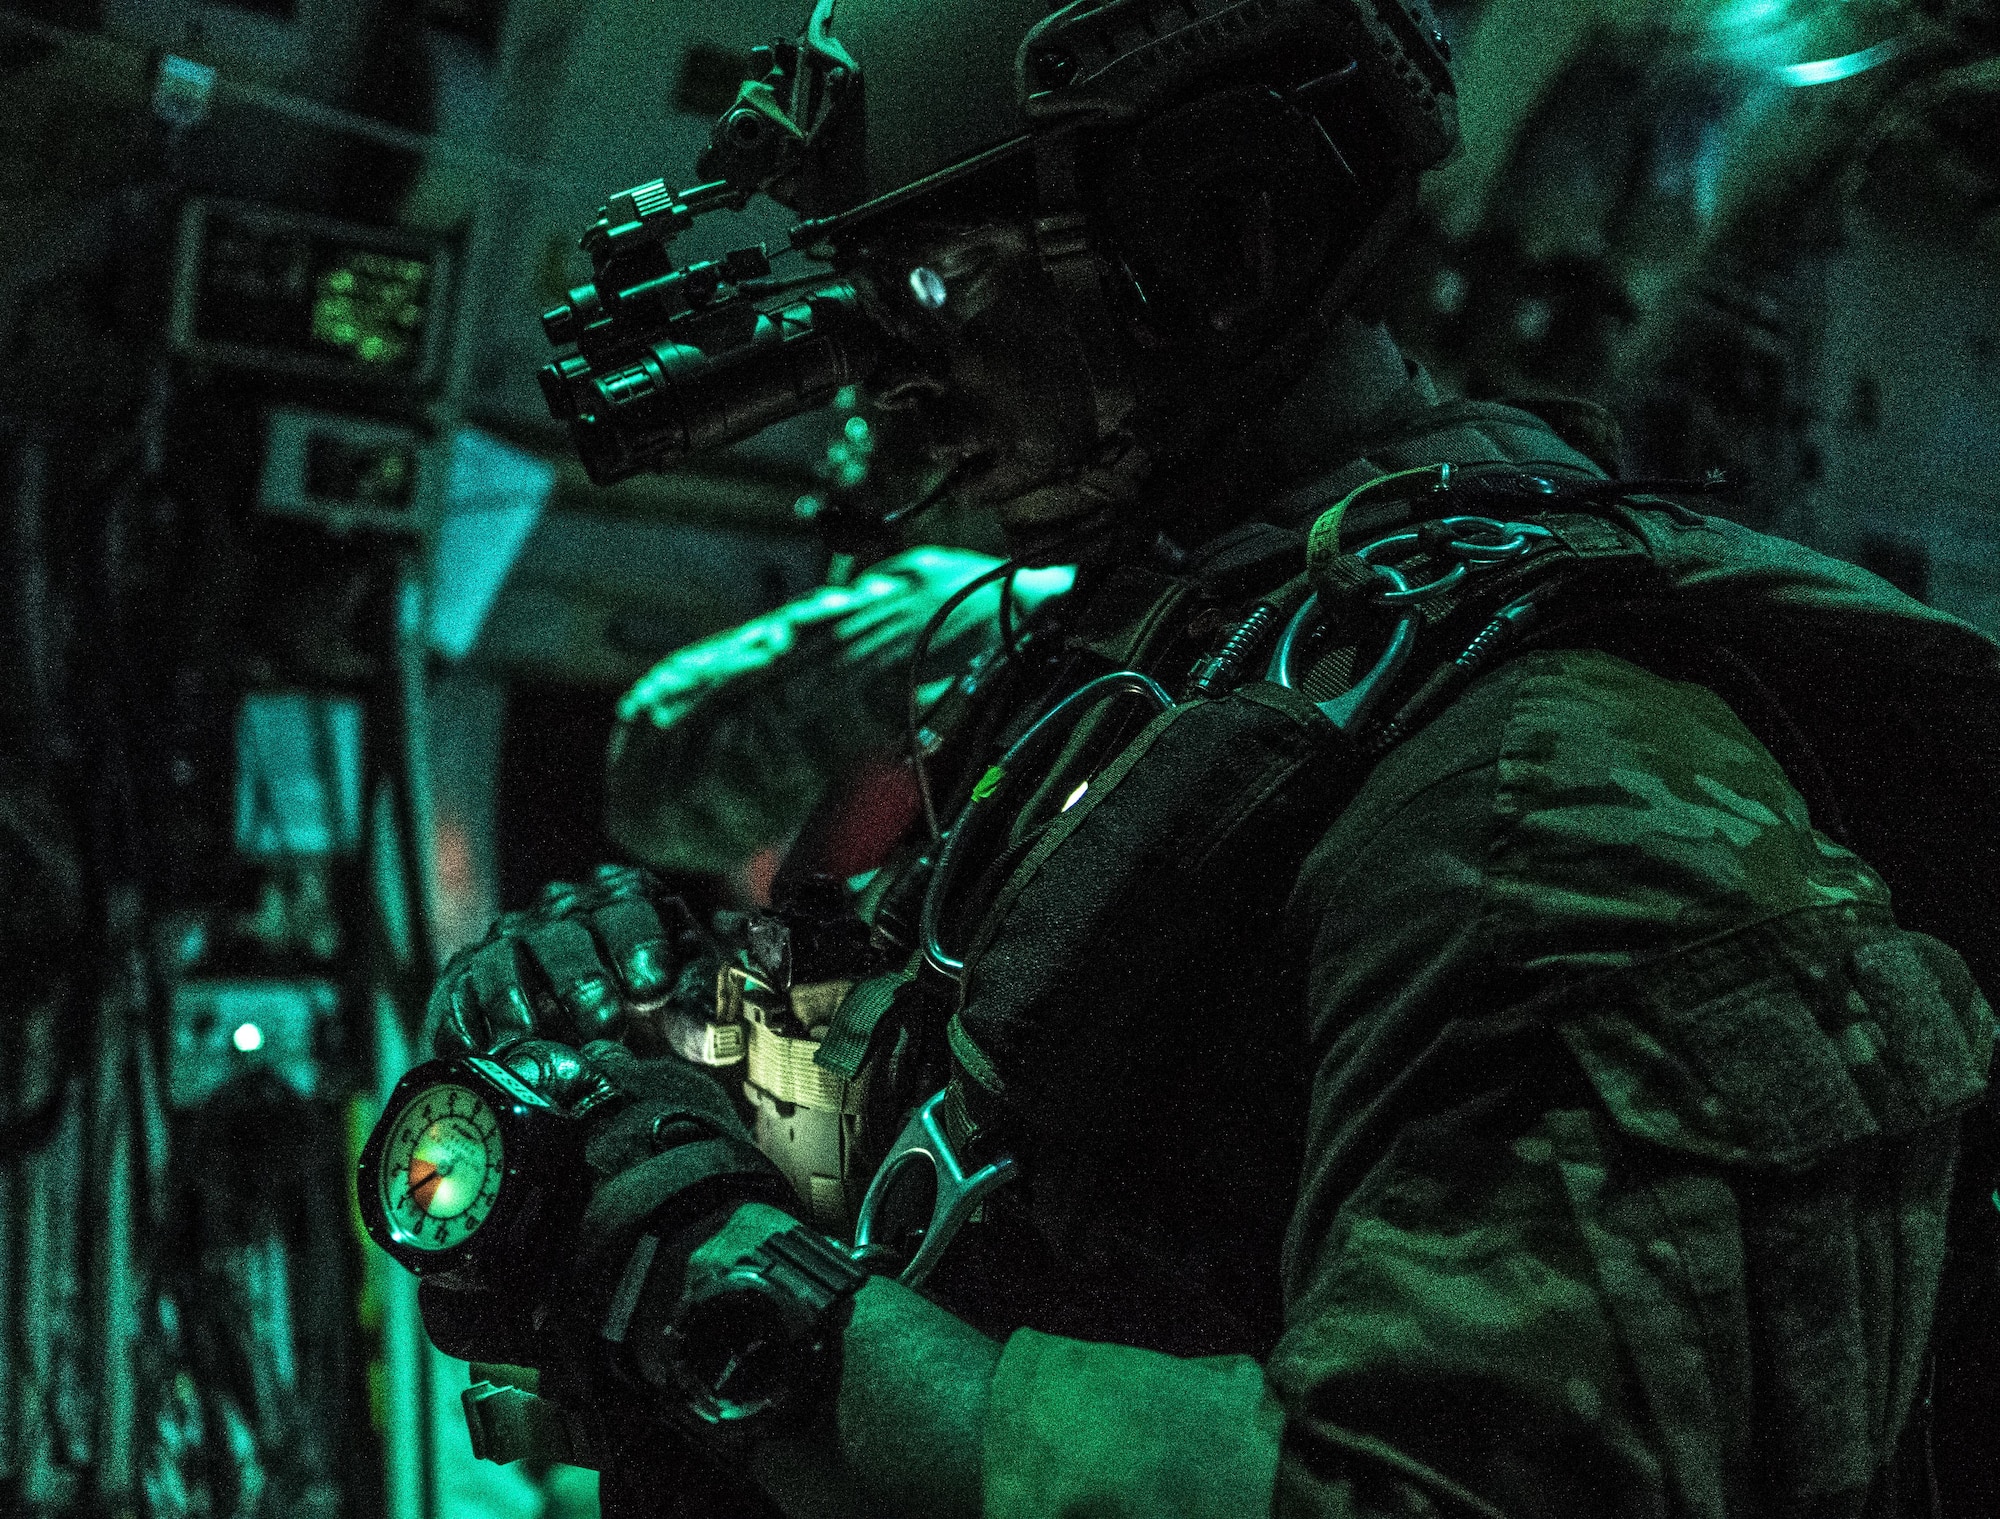 A U.S. Air Force 320th Special Tactics Squadron jumpmaster inspects his gear prior to high altitude, high opening (HAHO) jump operations July 11, 2017, over Shoalwater Bay Training Area in Queensland, Australia during Talisman Saber 2017. The 320th STS combat controllers and U.S. Marine Corps 3rd Reconnaissance Battalion operators infilled two days prior to the exercise’s massive tactical (MASS TAC) of 500 jumpers in order to establish the drop zone. (U.S. Air Force photo by Capt. Jessica Tait)